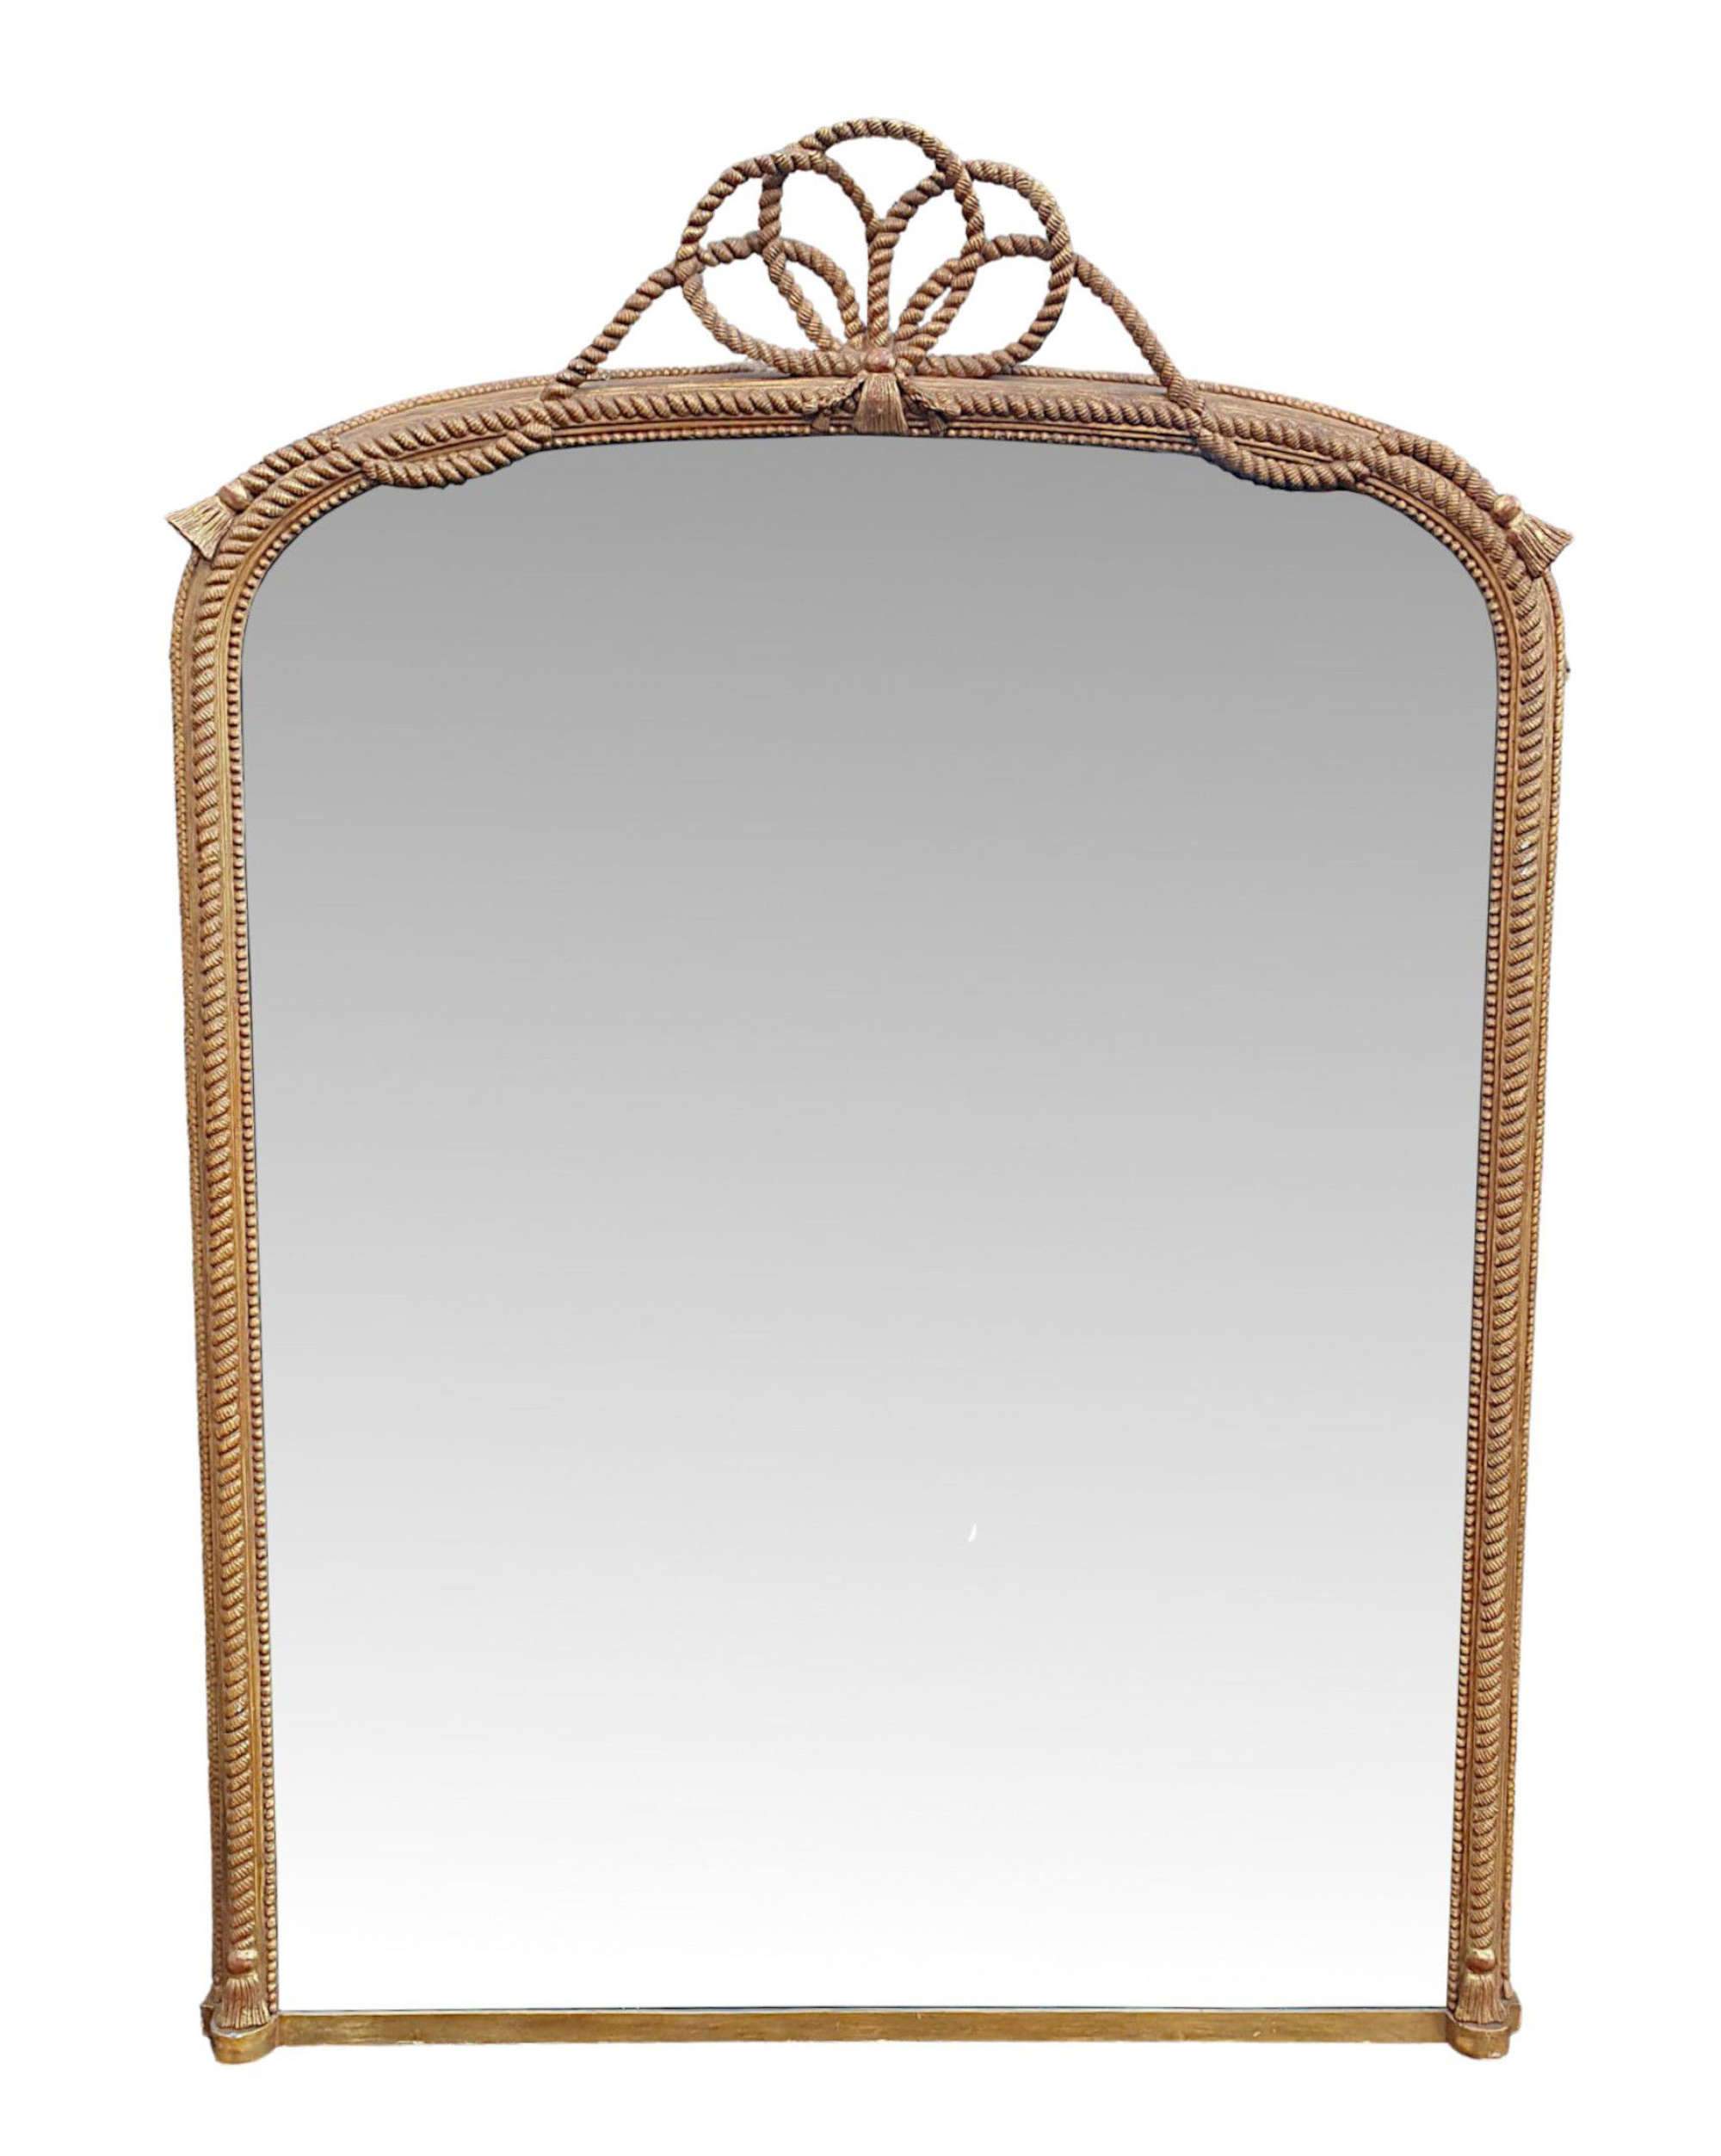 An Exceptional 19th Century Giltwood Arch Top Antique Overmantle Mirror